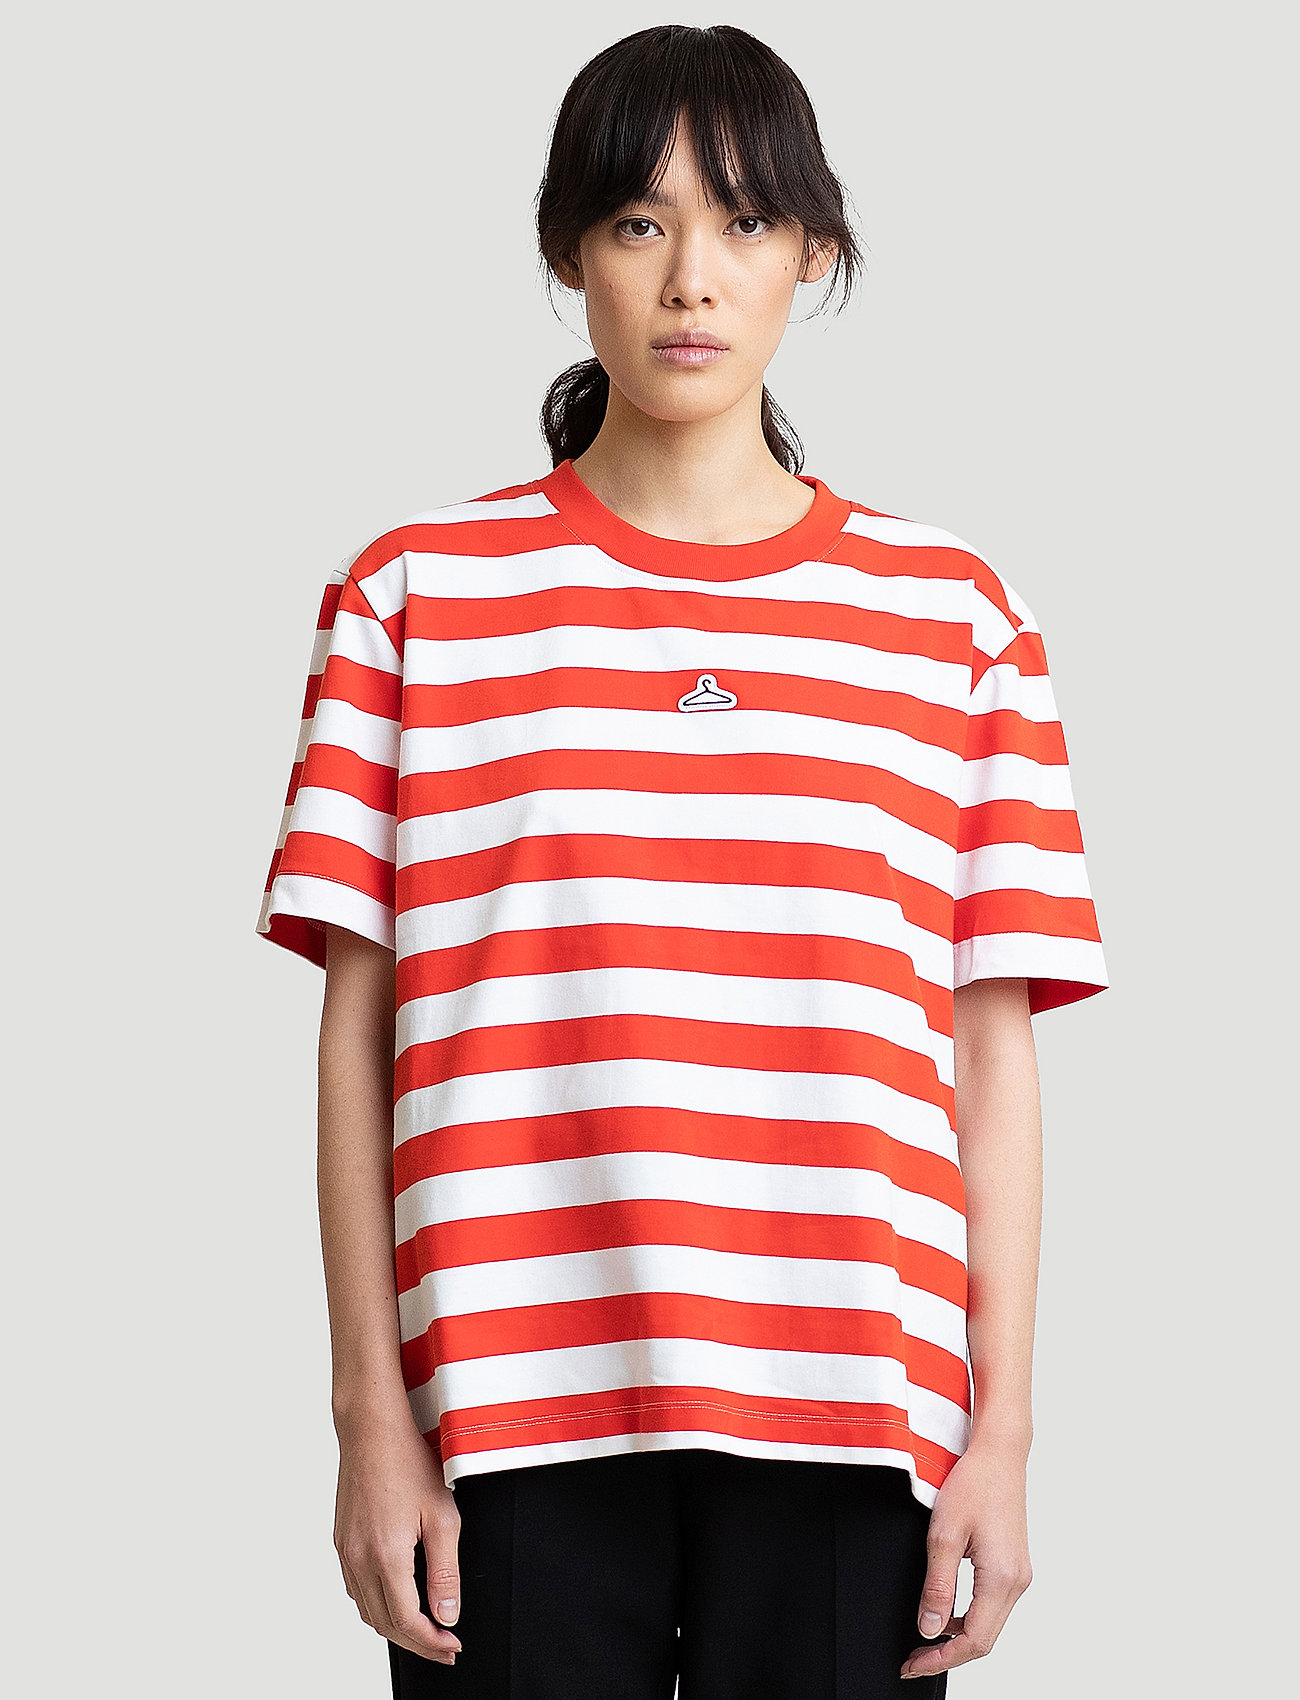 Hanger by Holzweiler - Hanger Striped Tee - t-shirts - red white 1664 - 0